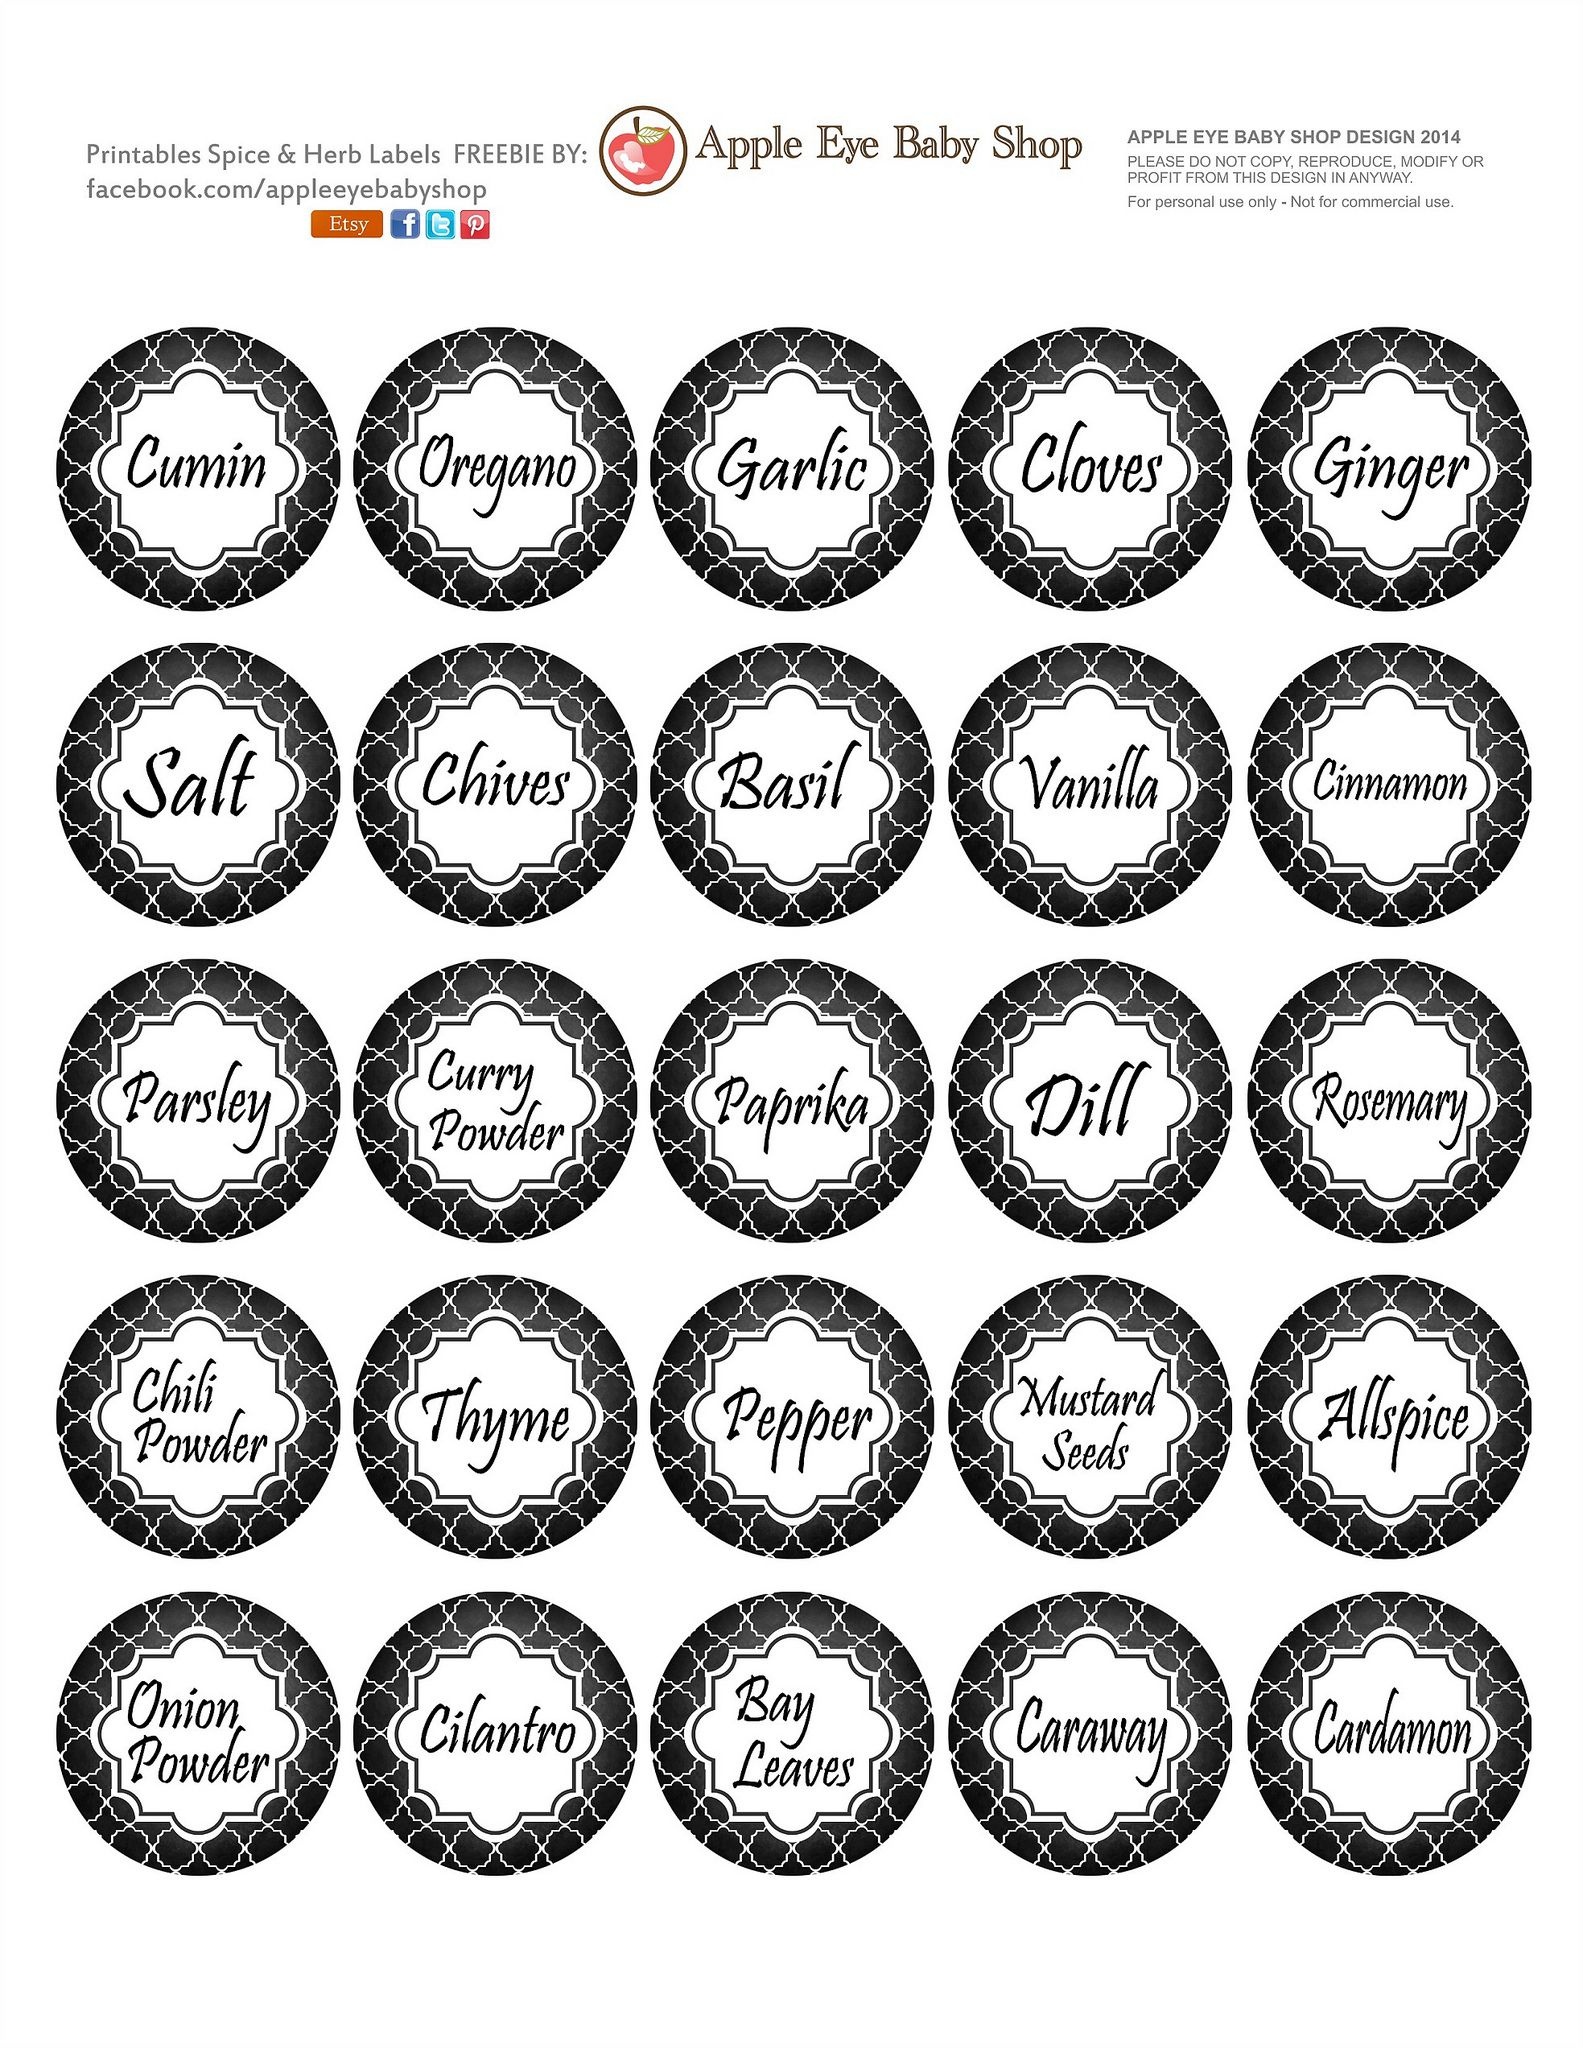 All Sizes | Free Printables | Spice &amp;amp; Herb Labelsapple Eye Baby - Free Printable Spice Labels